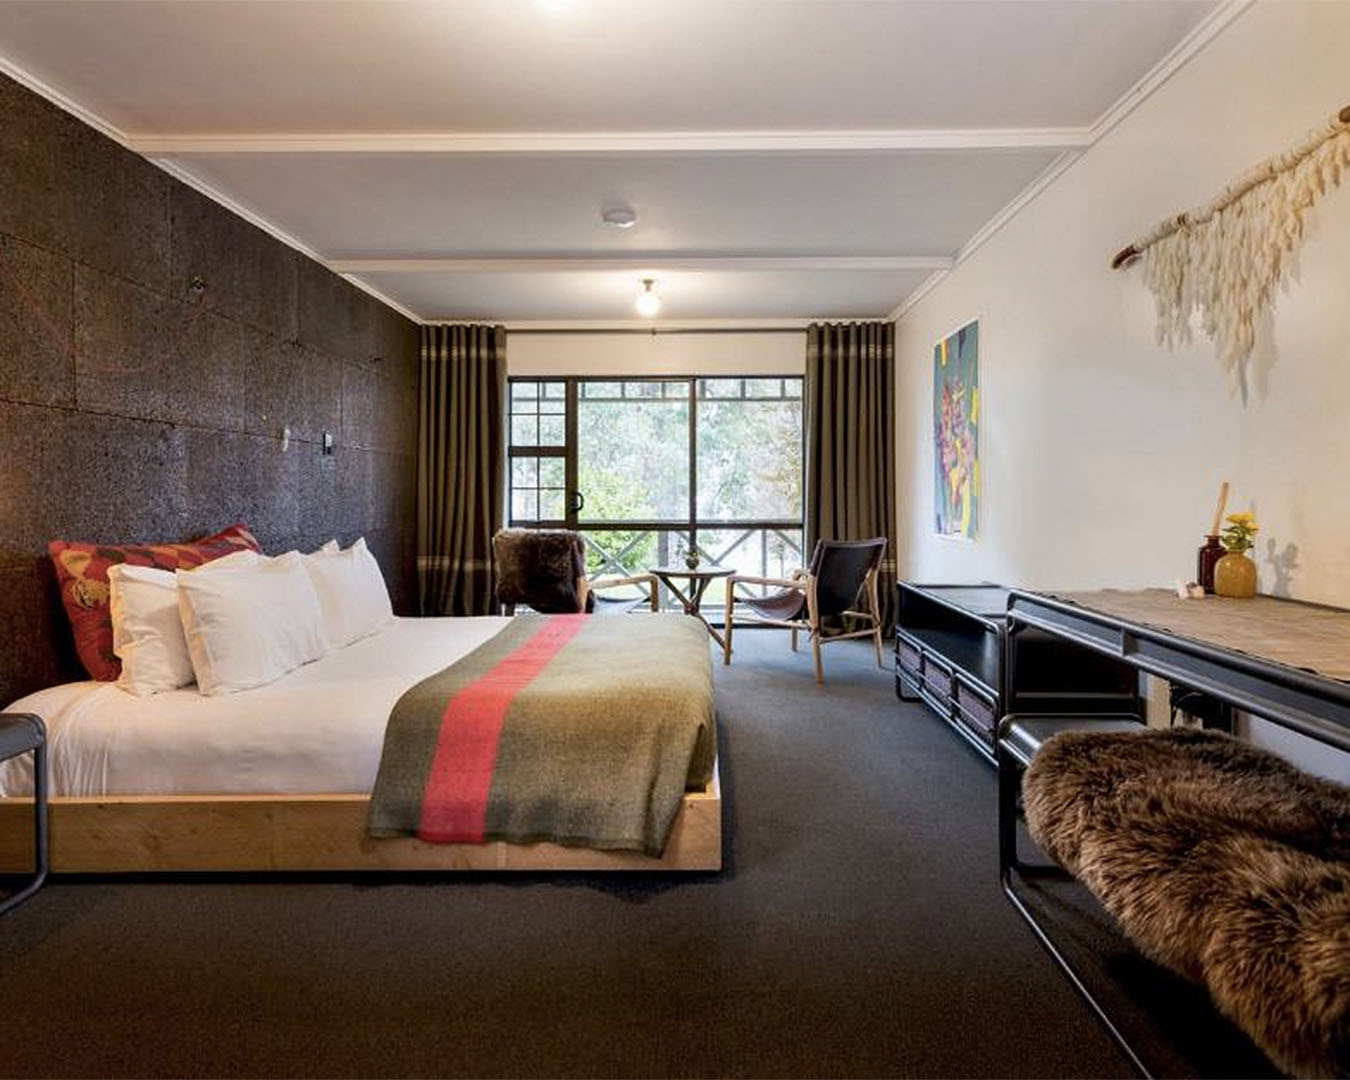 A room at The Sherwood, one of the best hotels in Queenstown.